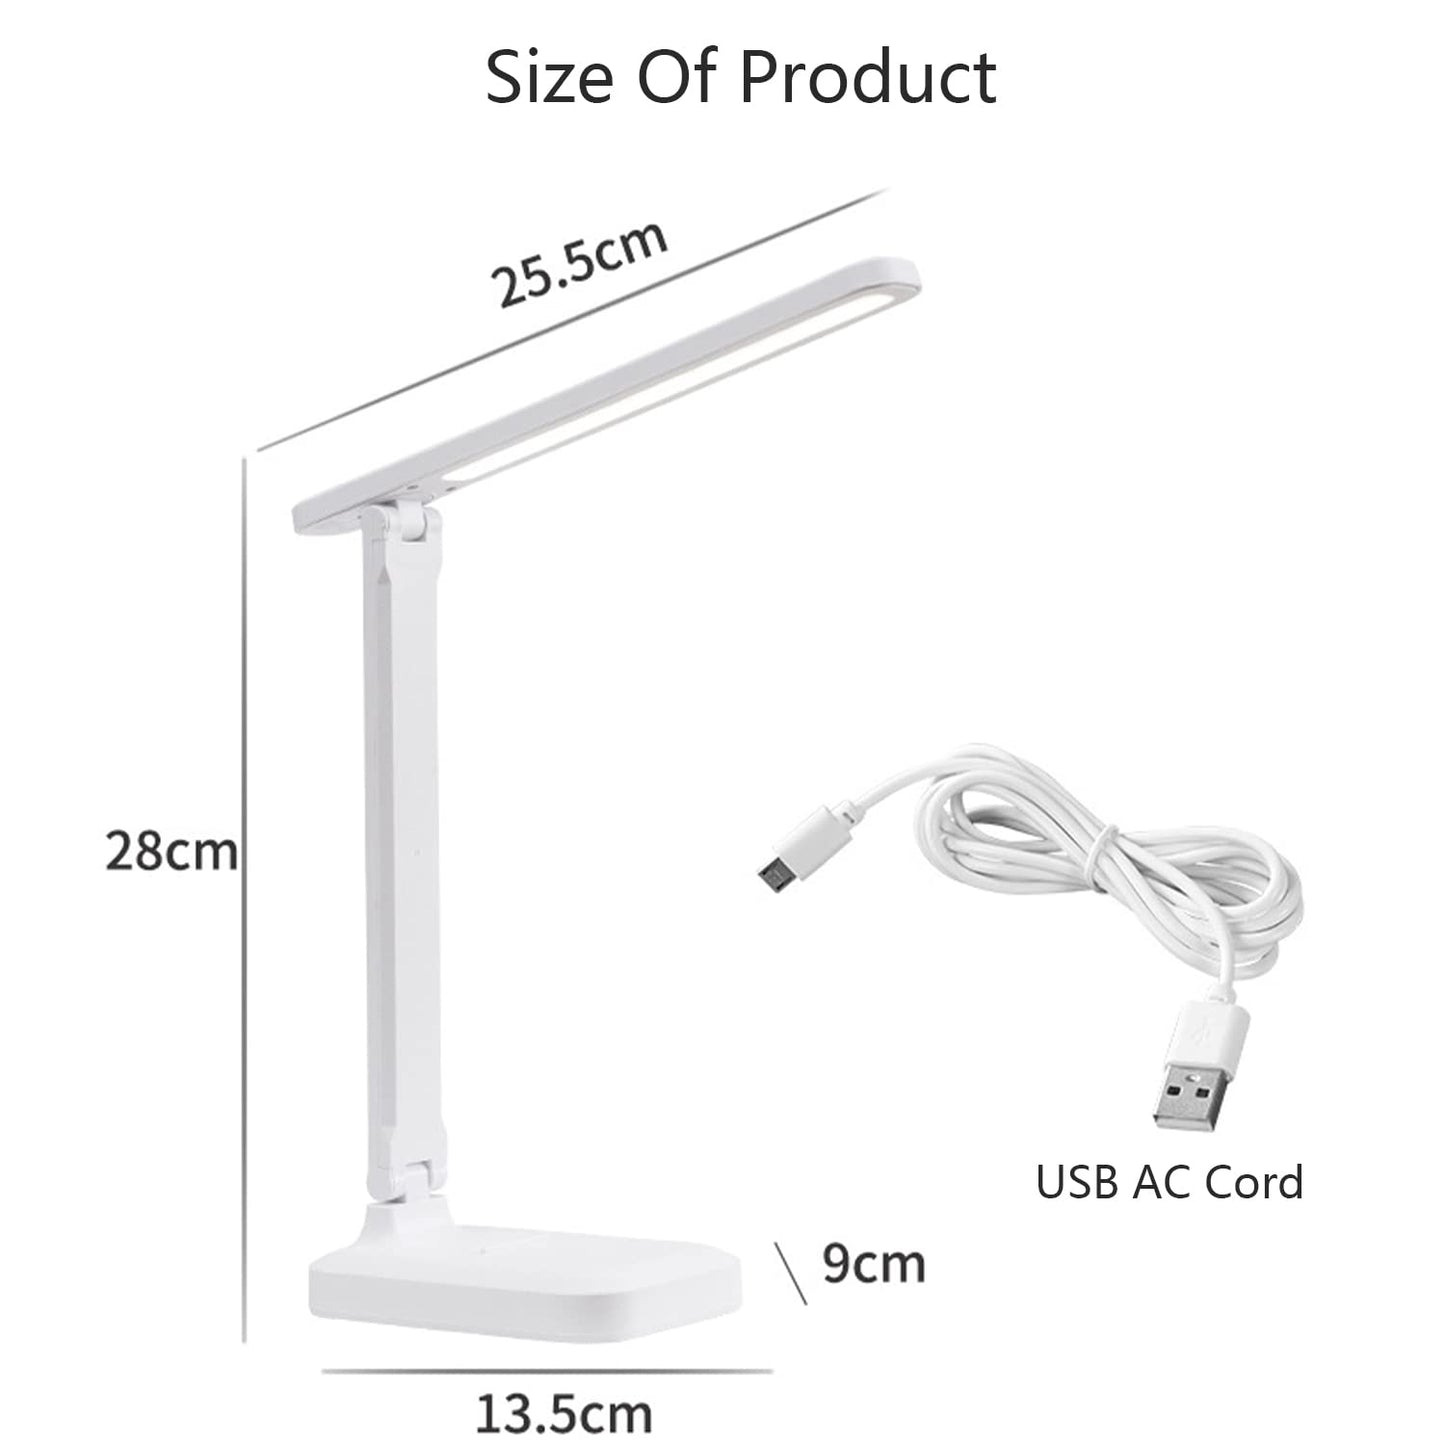 Necomi LED Desk Lamp, Table Lamp For Computer/Desktop, Rechargeable, Eye-Caring, Touch Control With USB Charging Port-Bedside Table Lamp for Reading, Study Lamp for Kids, Home, Office White